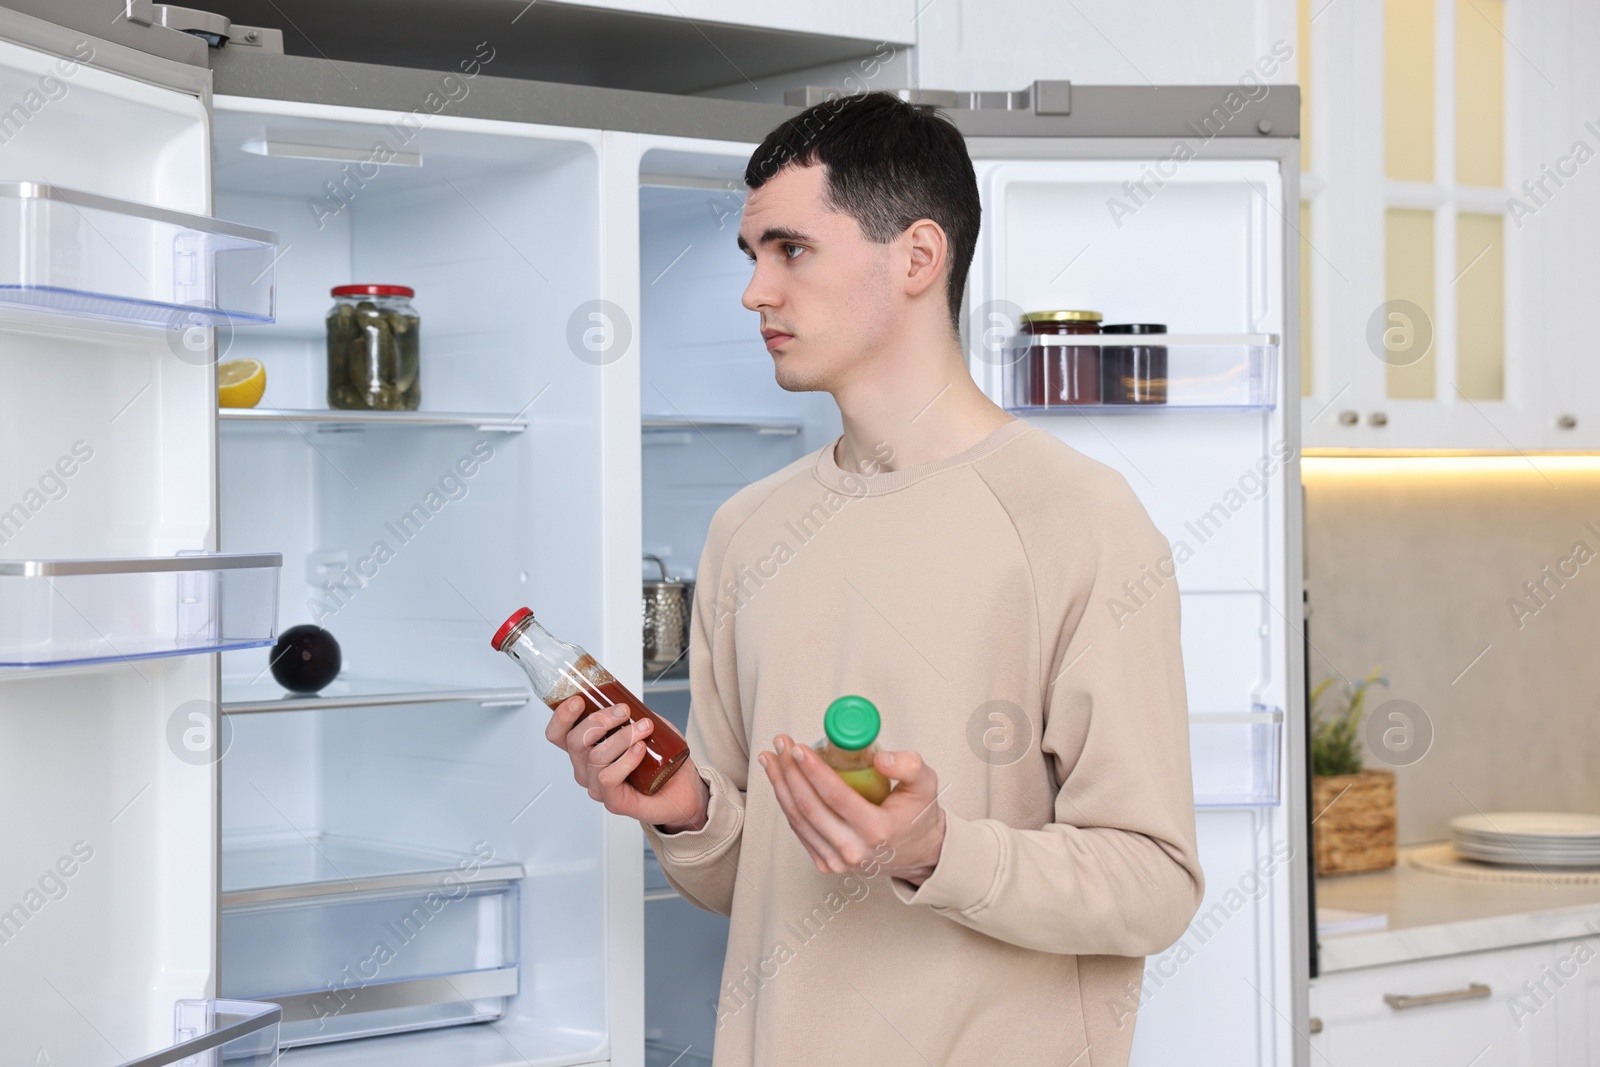 Photo of Upset man with sauces near empty refrigerator in kitchen